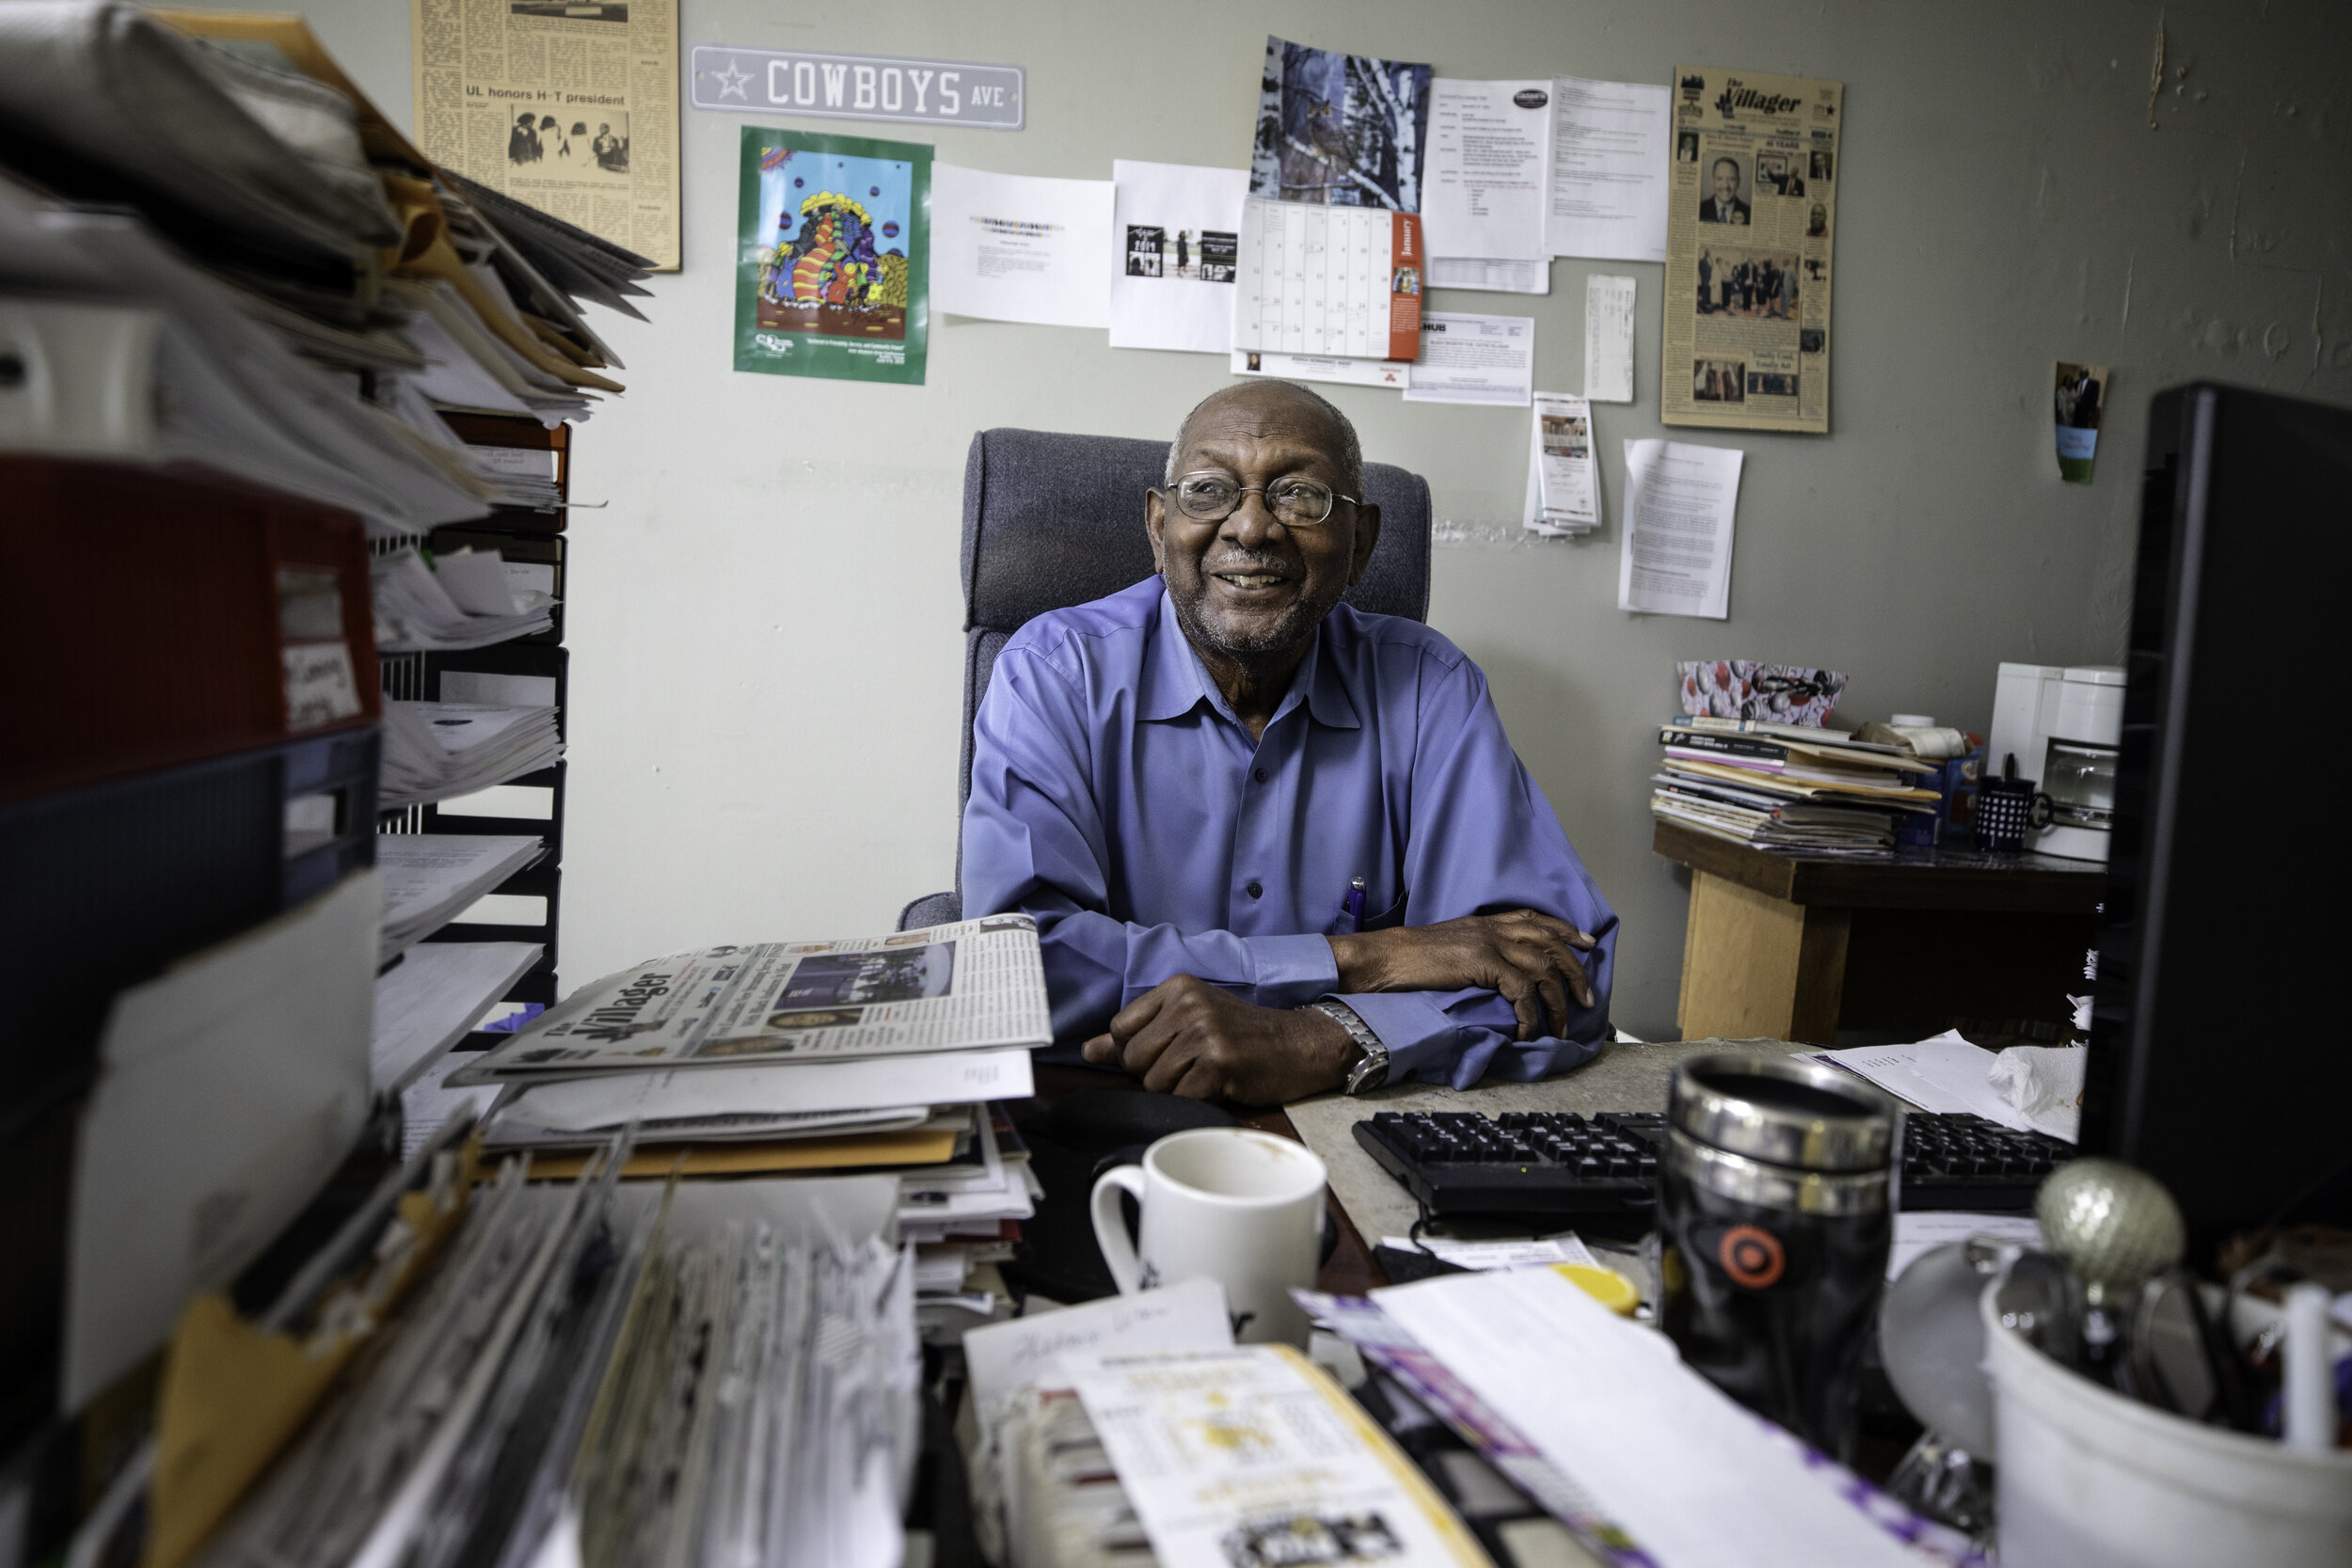  AUSTIN, TX. Tommy Wyatt, Publisher and Editor-in-Chief of The Villager newspaper. The family-owned newspaper has served as a free community service weekly with an emphasis on news about Austin’s African American community since 1973. 